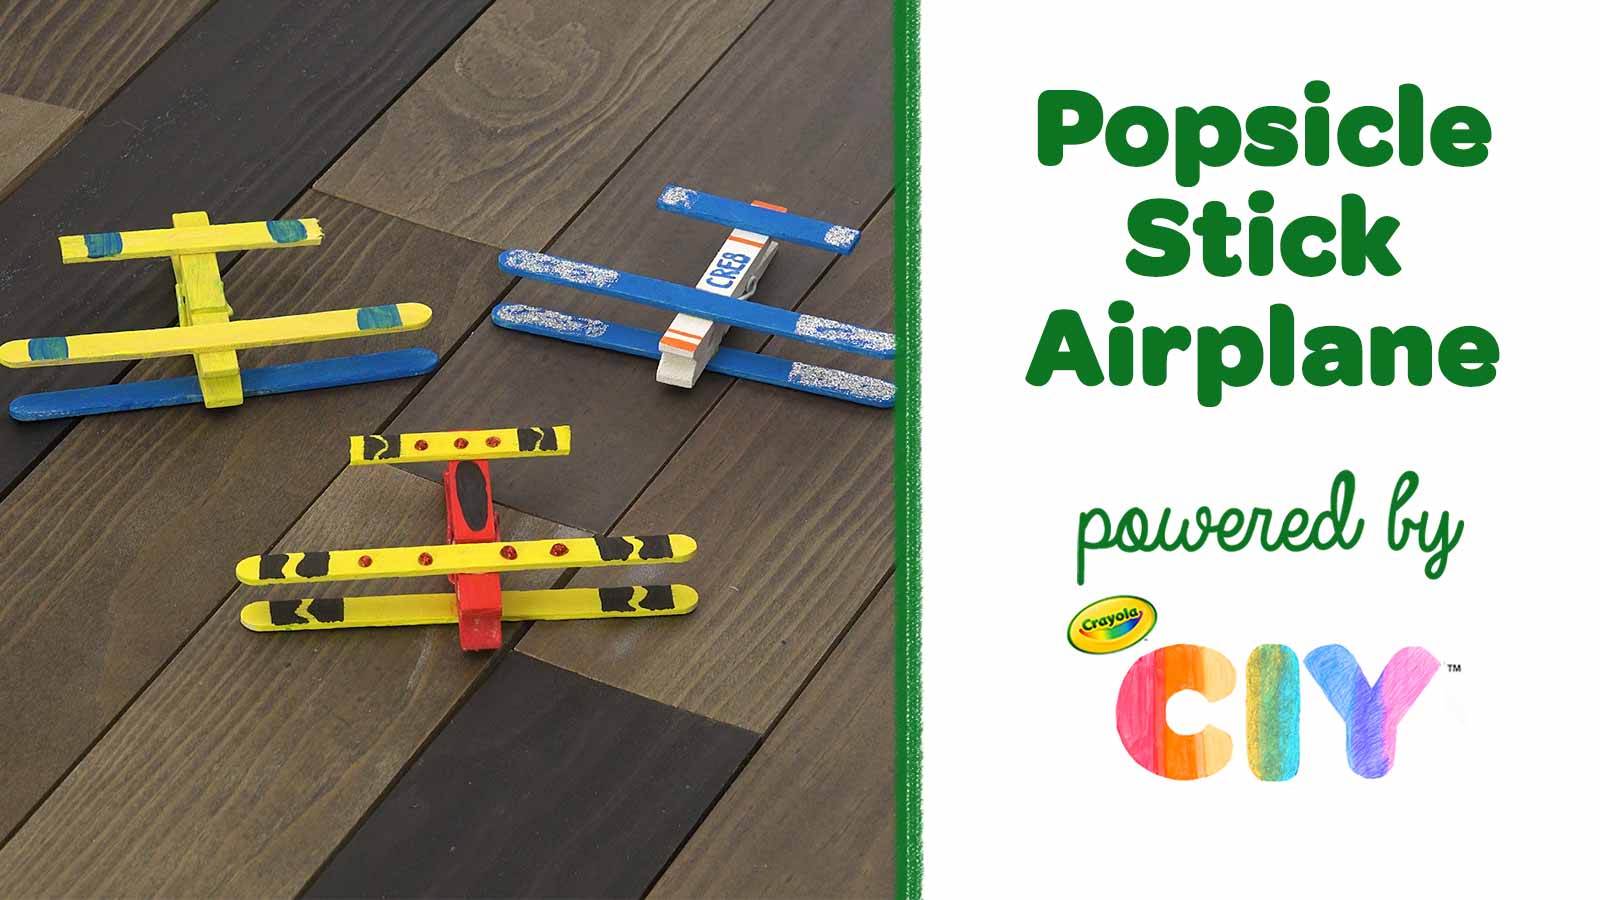 Popsicle Stick Airplane_Poster Frame